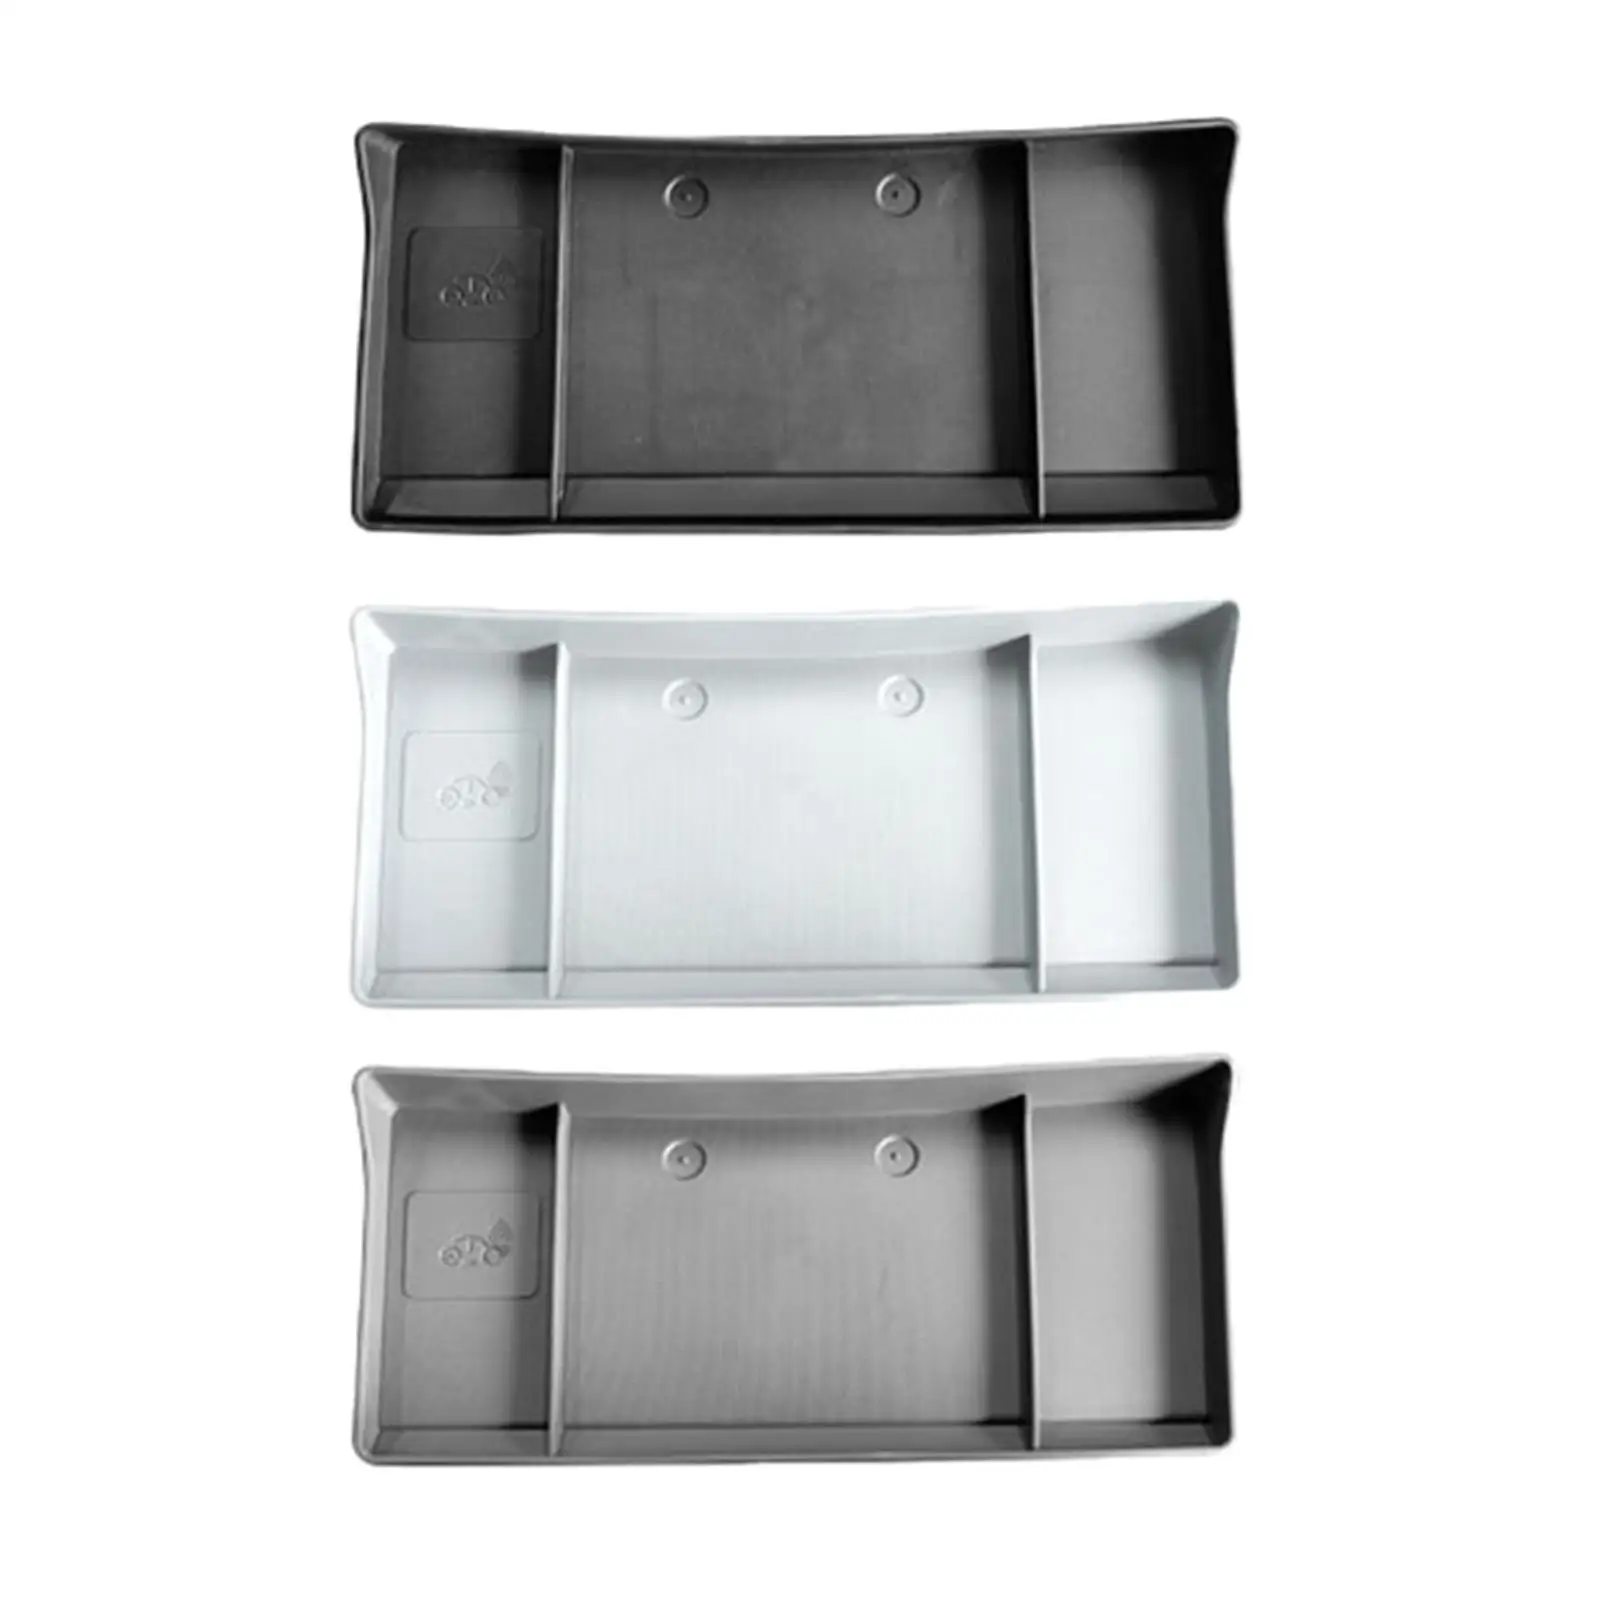 Center Screen Console Tray Organizer for Storing Glasses Paper Towel Behind Screen Storage Tray for Tesla Model 3 Y Parts